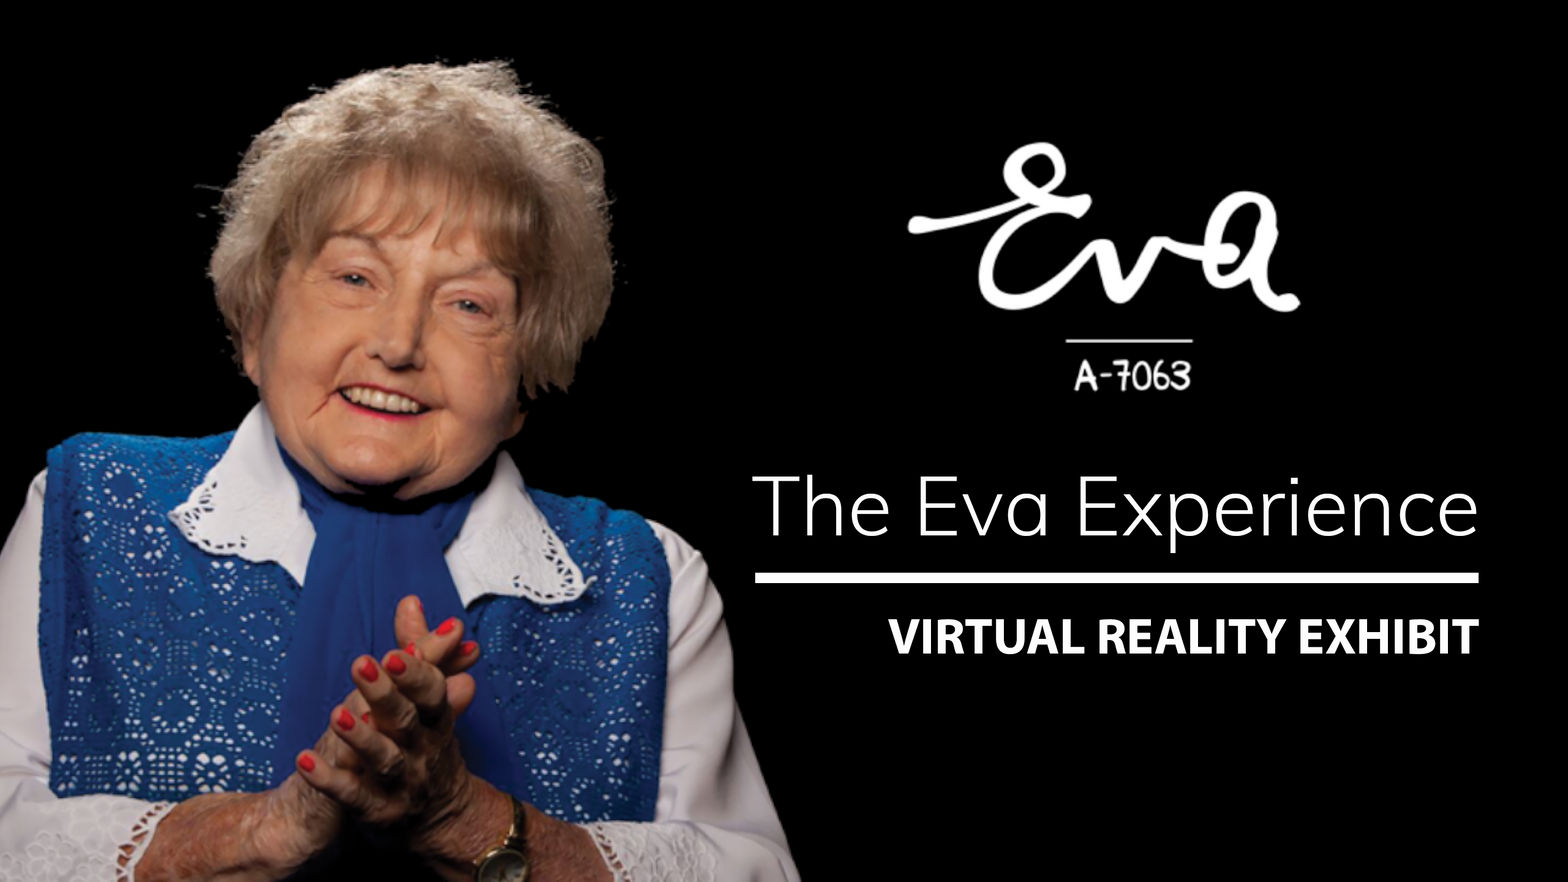 The Eva Experience - VR Exhibit for Quest